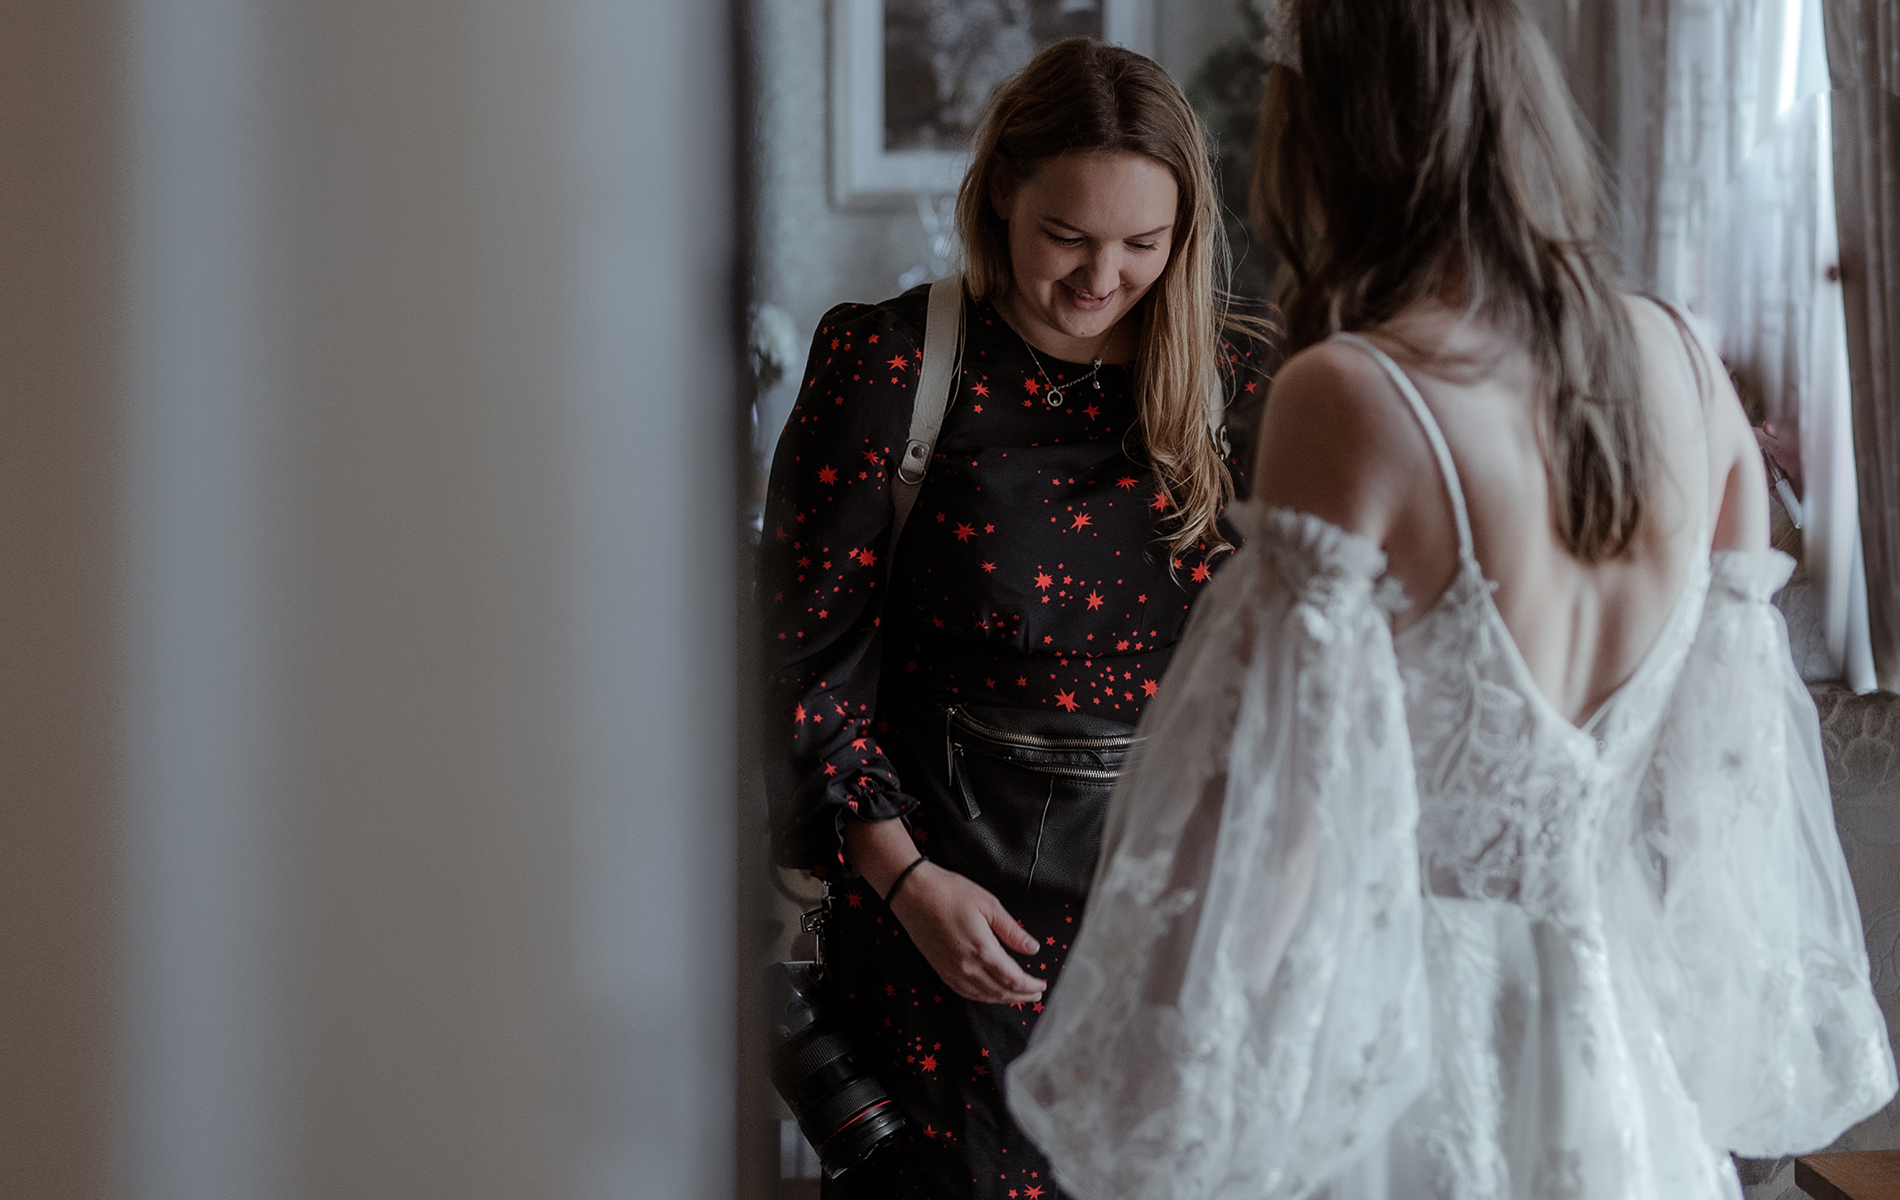 photographer looks down at bride in dress and smiles